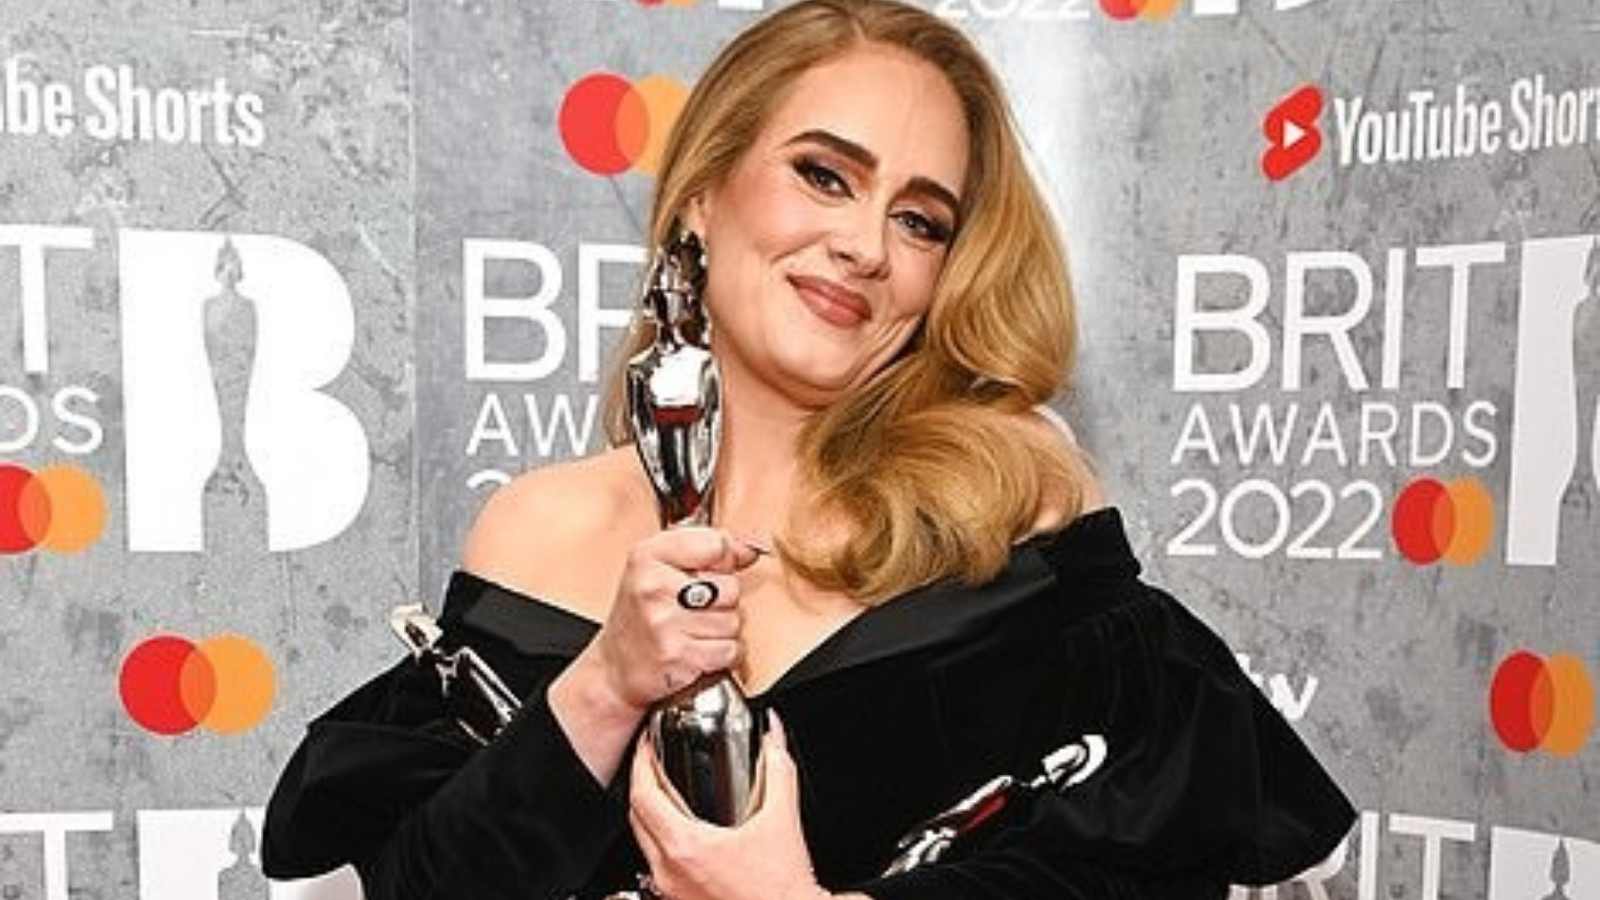 Adele takes away Three awards in her names